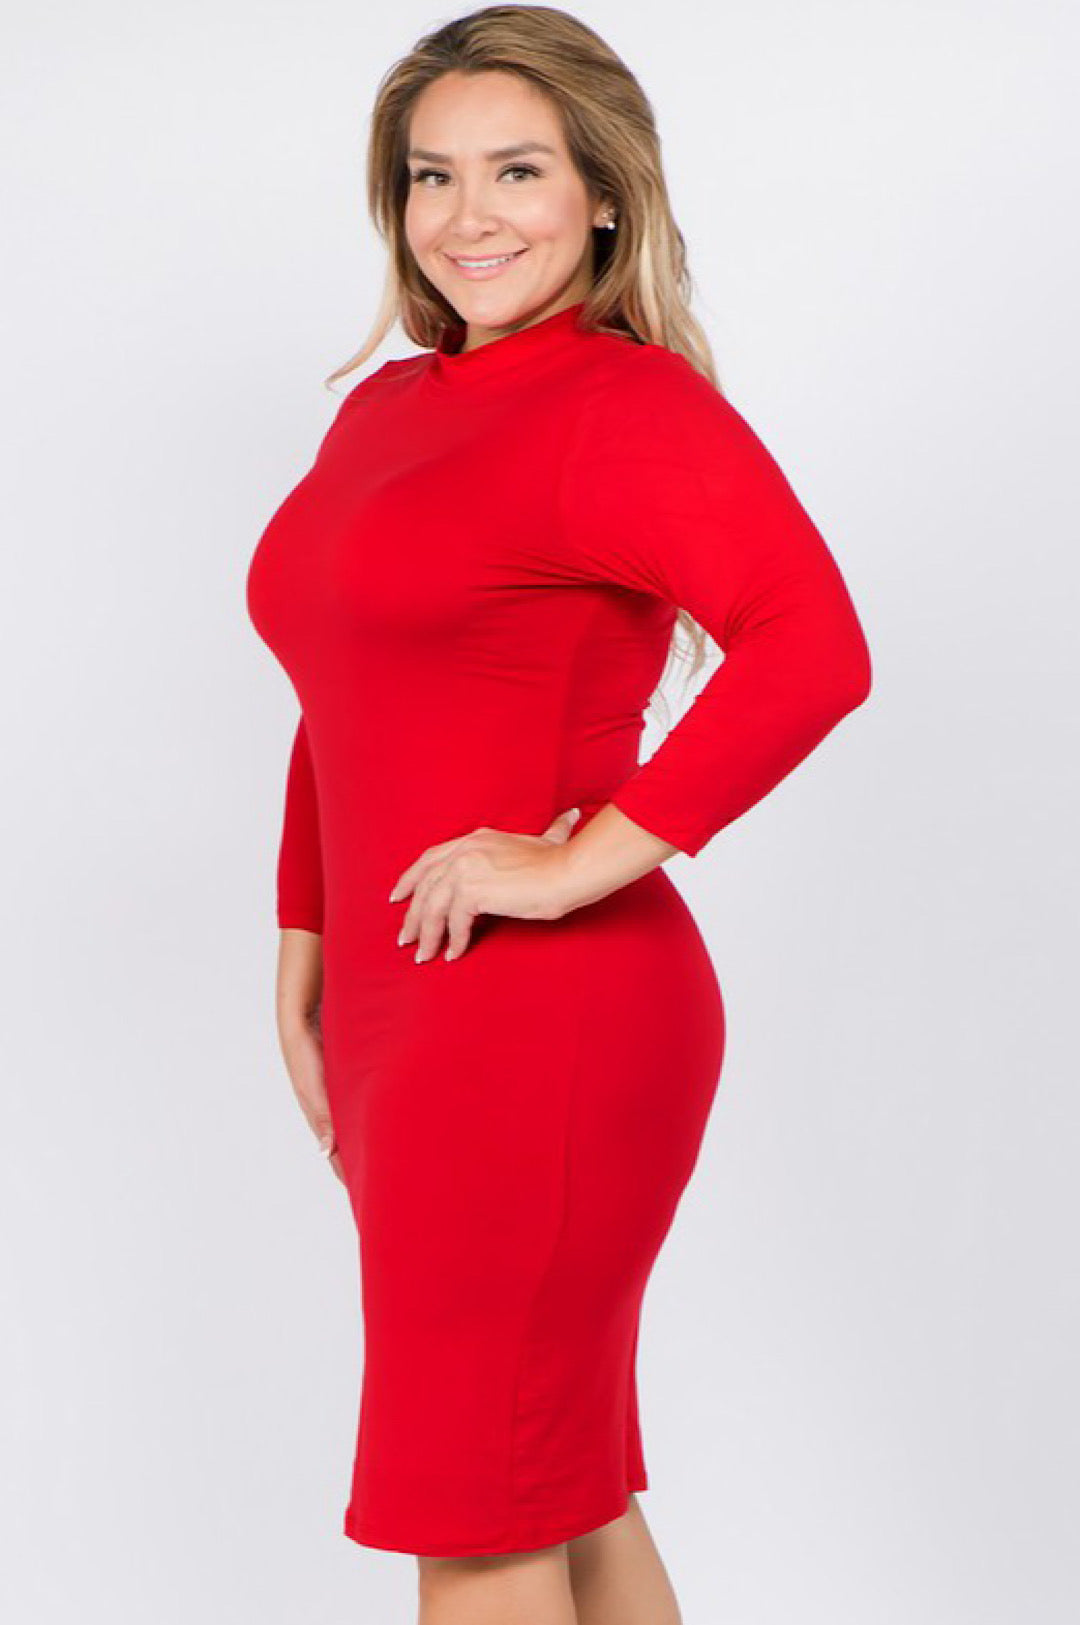 Red Mock Neck Form Fitted Dress Dress